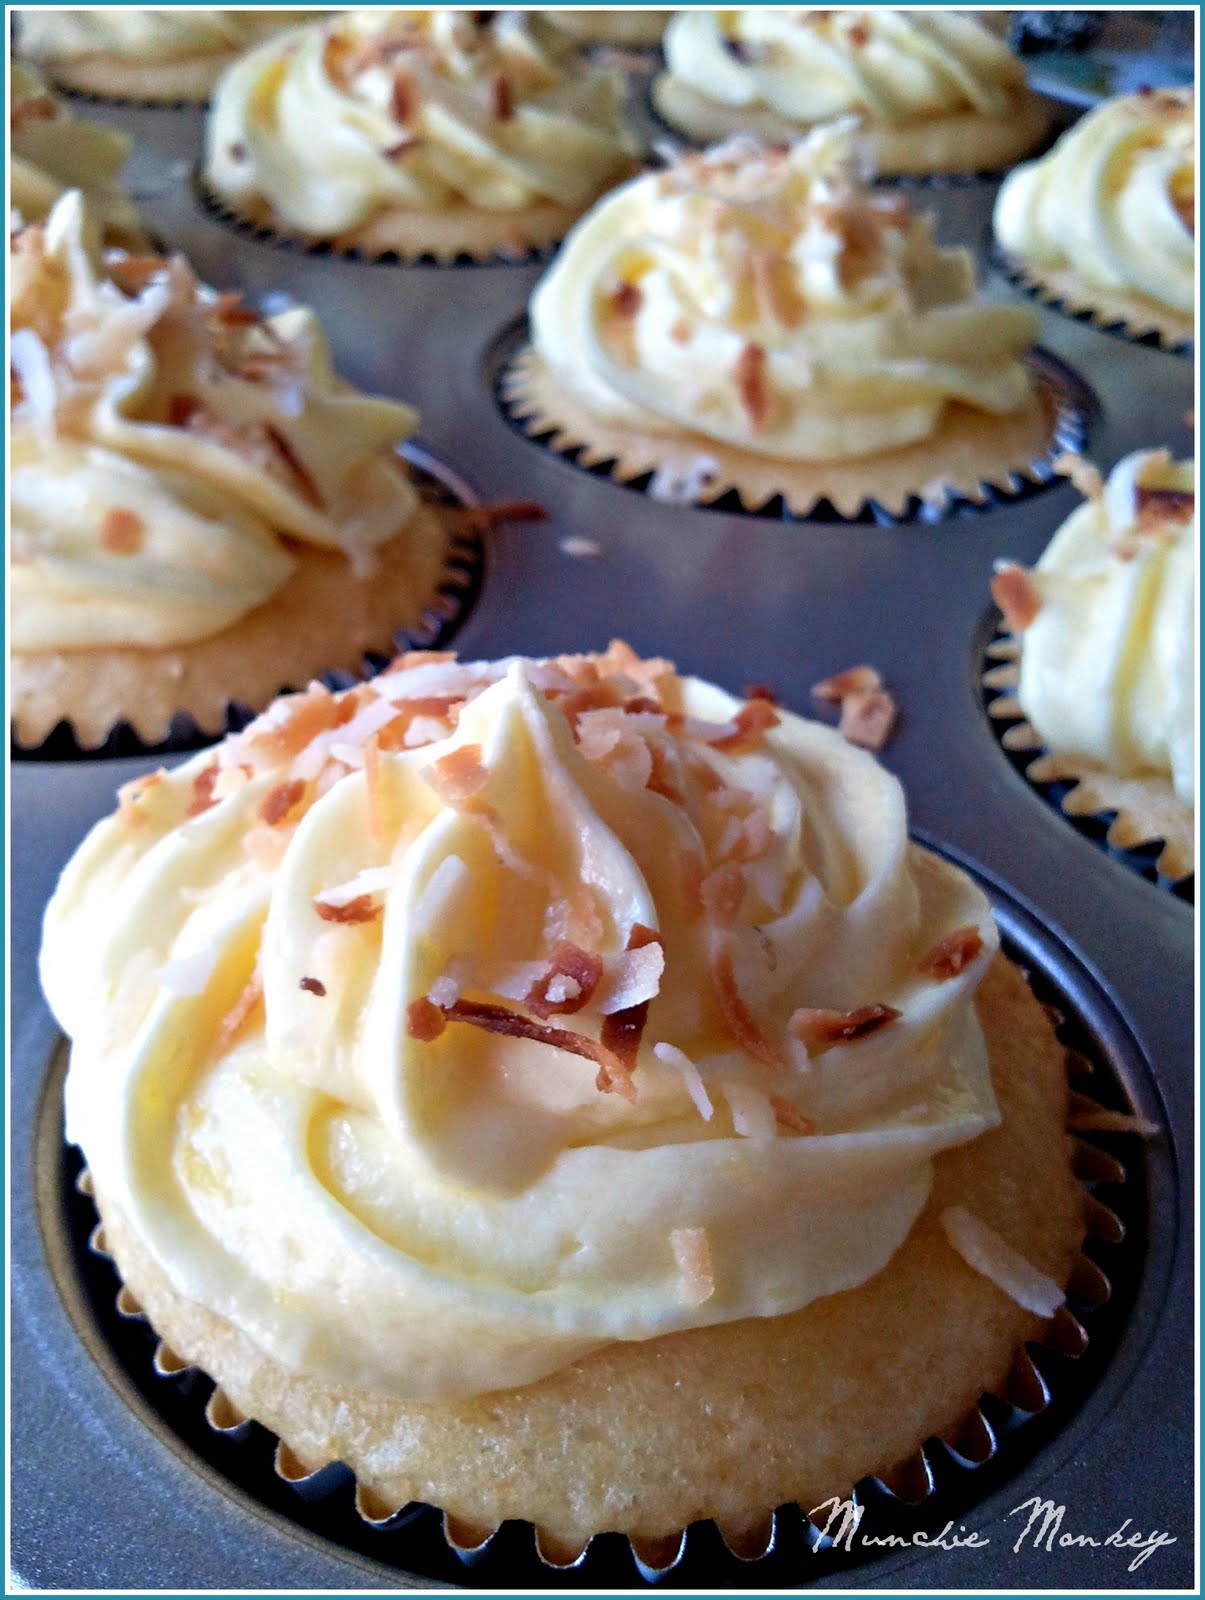 Pina colada cupcakes with Butter cream frosting made with coconut rum